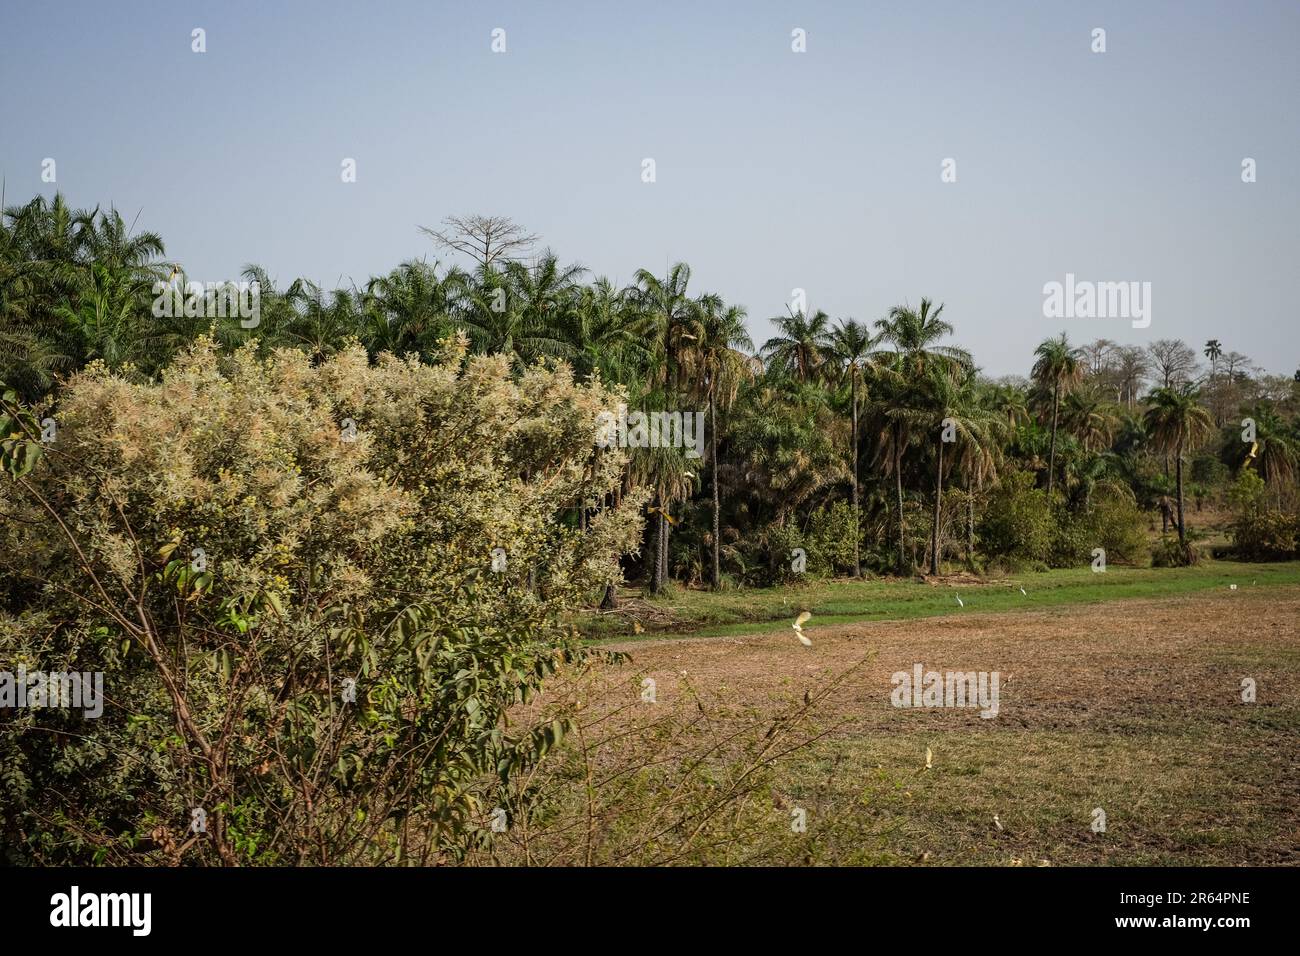 Nicolas Remene / Le Pictorium -  Bissau capital of Guinea-Bissau GNB) -  12/3/2017  -  Guinea-Bissau / Bissau / Bissau  -  Rice fields on the road between Bissau and Gabu, a town in the north-east of Guinea-Bissau, on 12 March 2017. Stock Photo